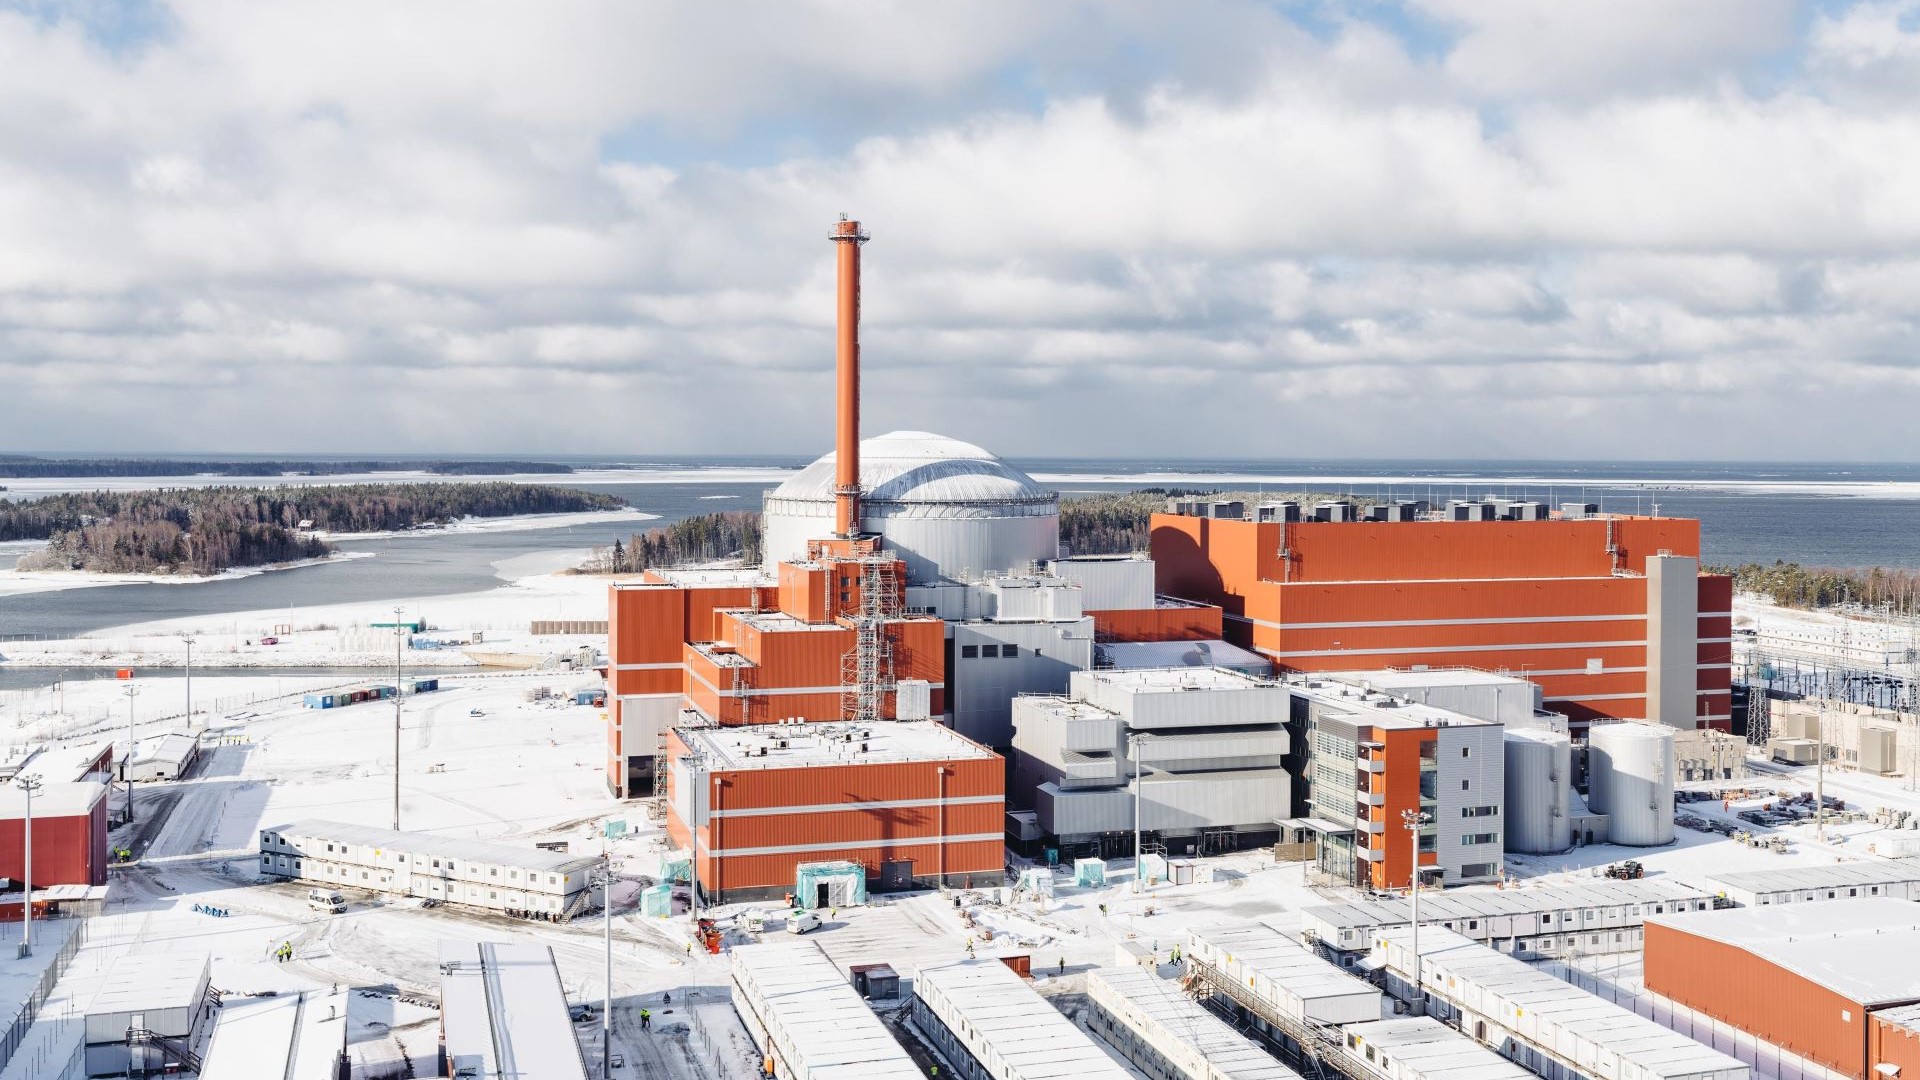 Olkiluoto nuclear power station in winter